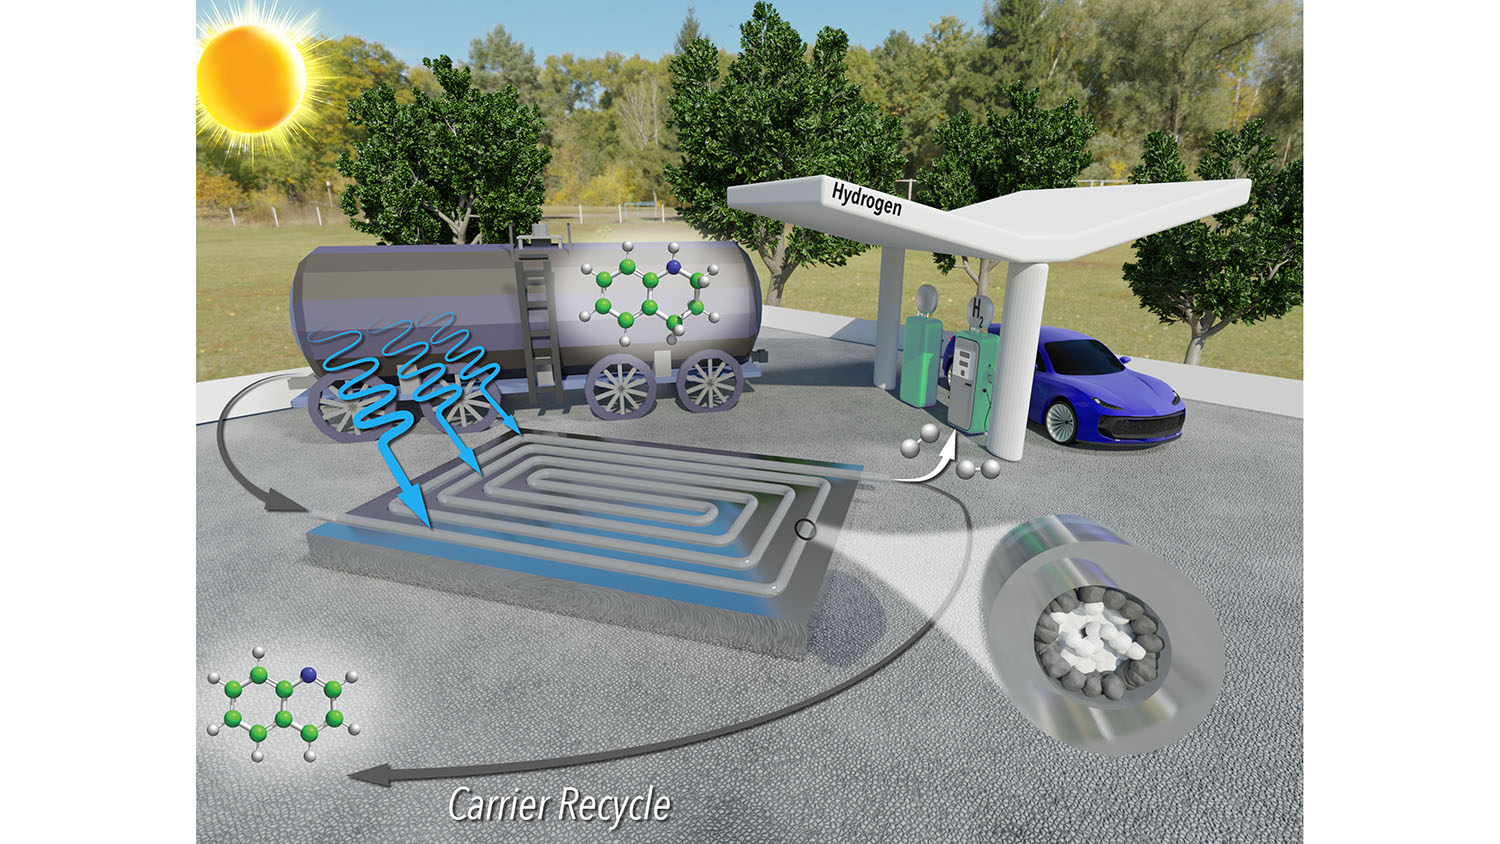 Color illustration of lifecycle of hydrogen fuel starting with offloading from tanker to underground storage to fueling of vehicle.